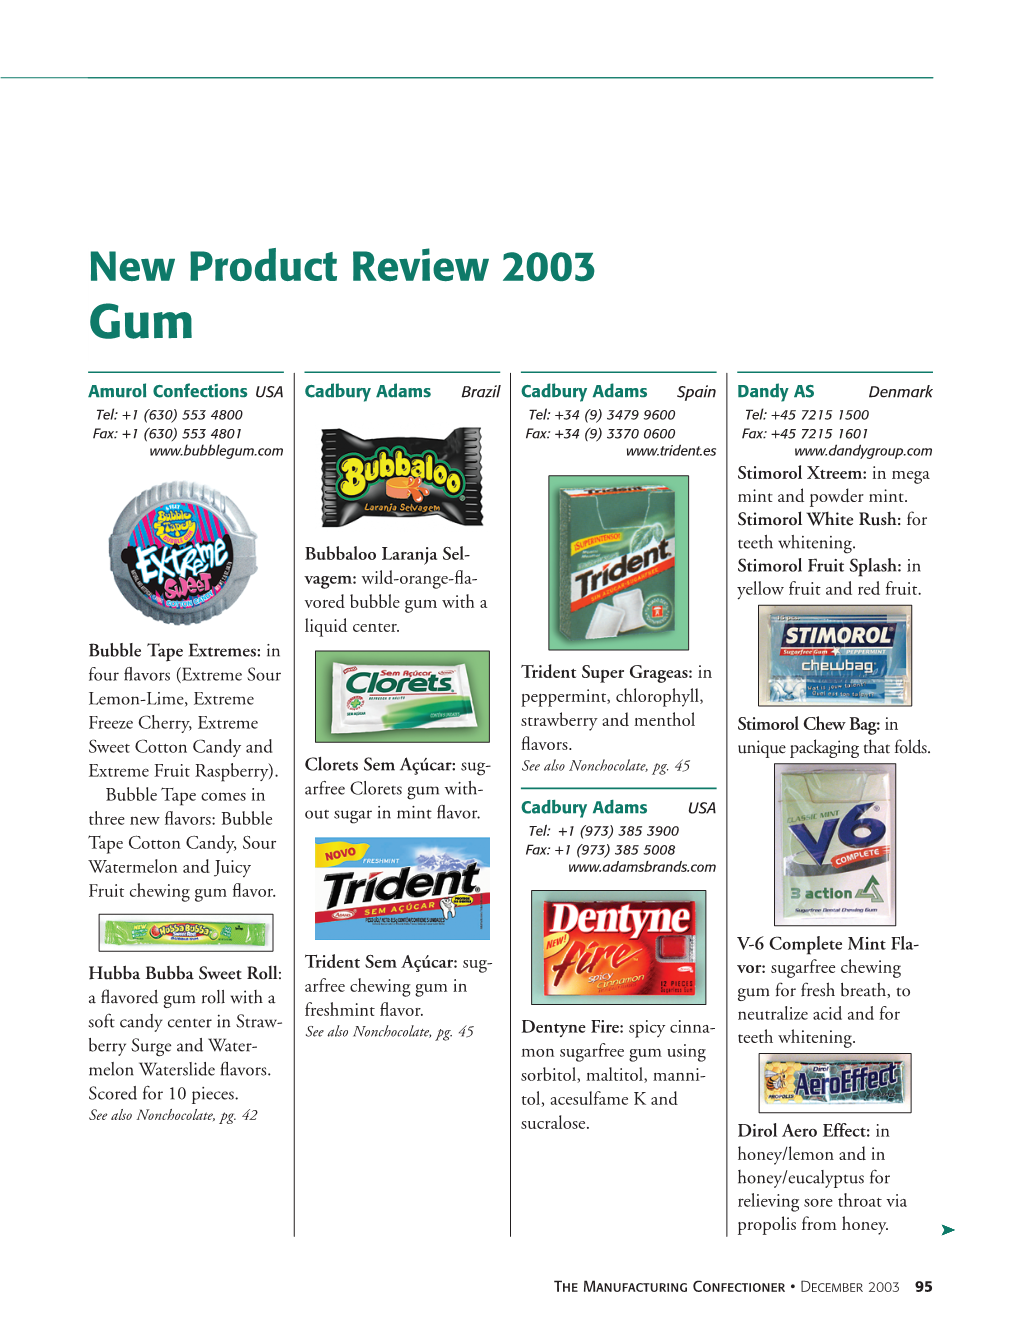 New Product Review 2003 Gum